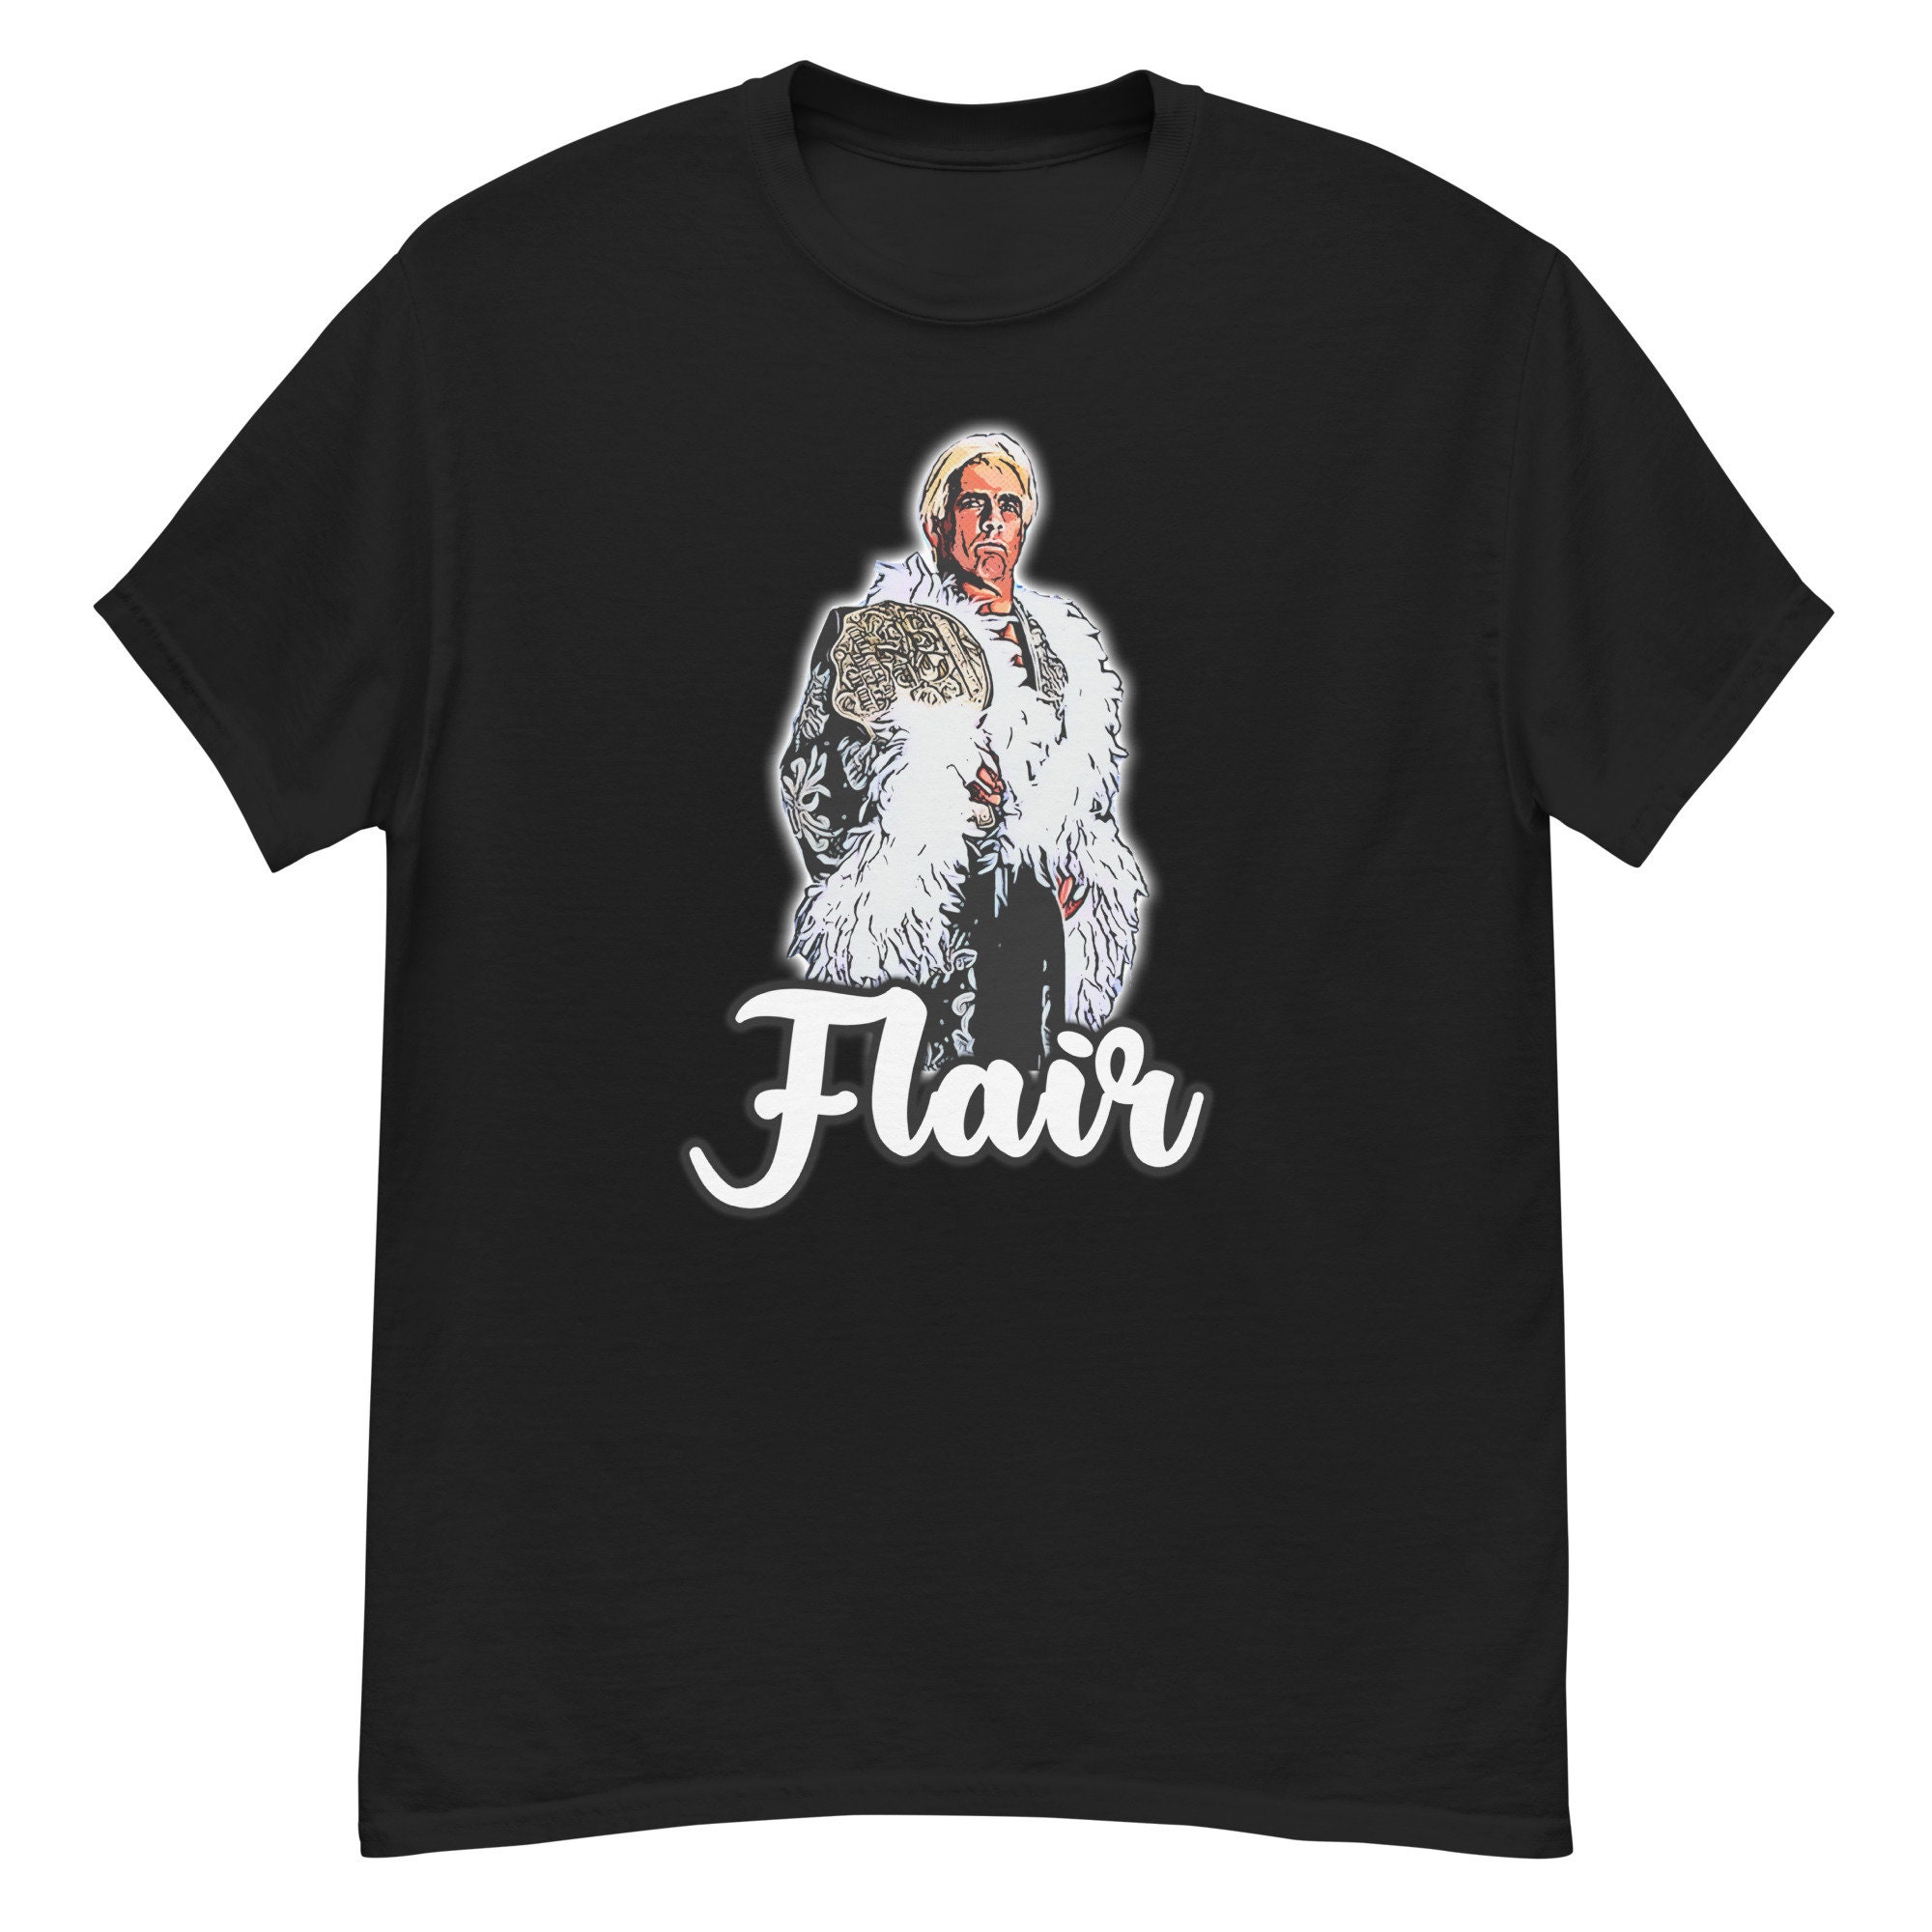 Discover Ric Flair tshirt 80s wrestling tee